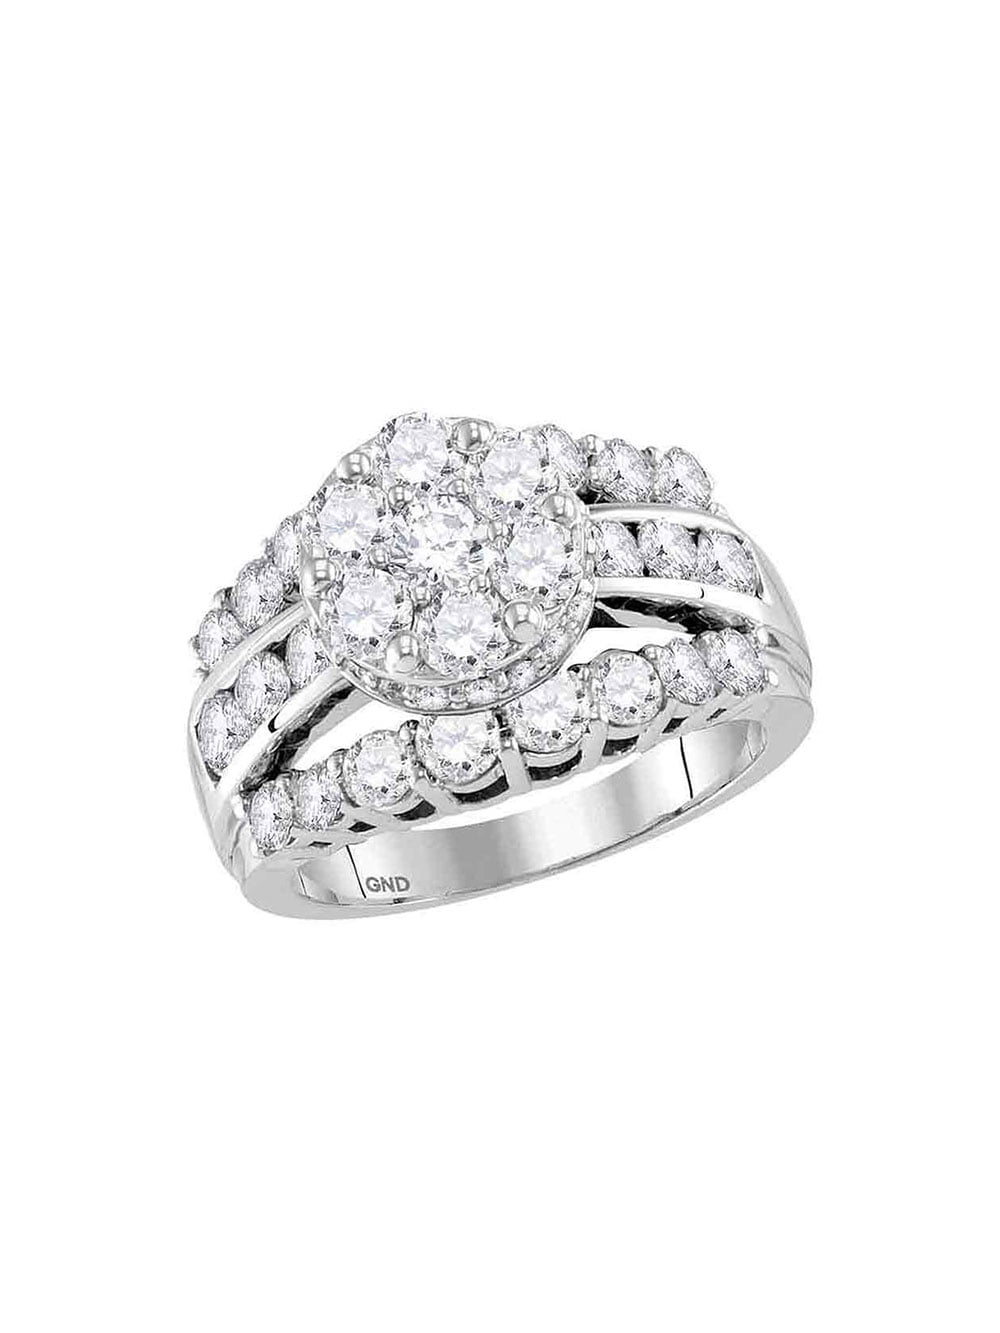 3.25Ct Marquise lab-created Diamond Cluster Bridal Ring 14K White Gold Finish